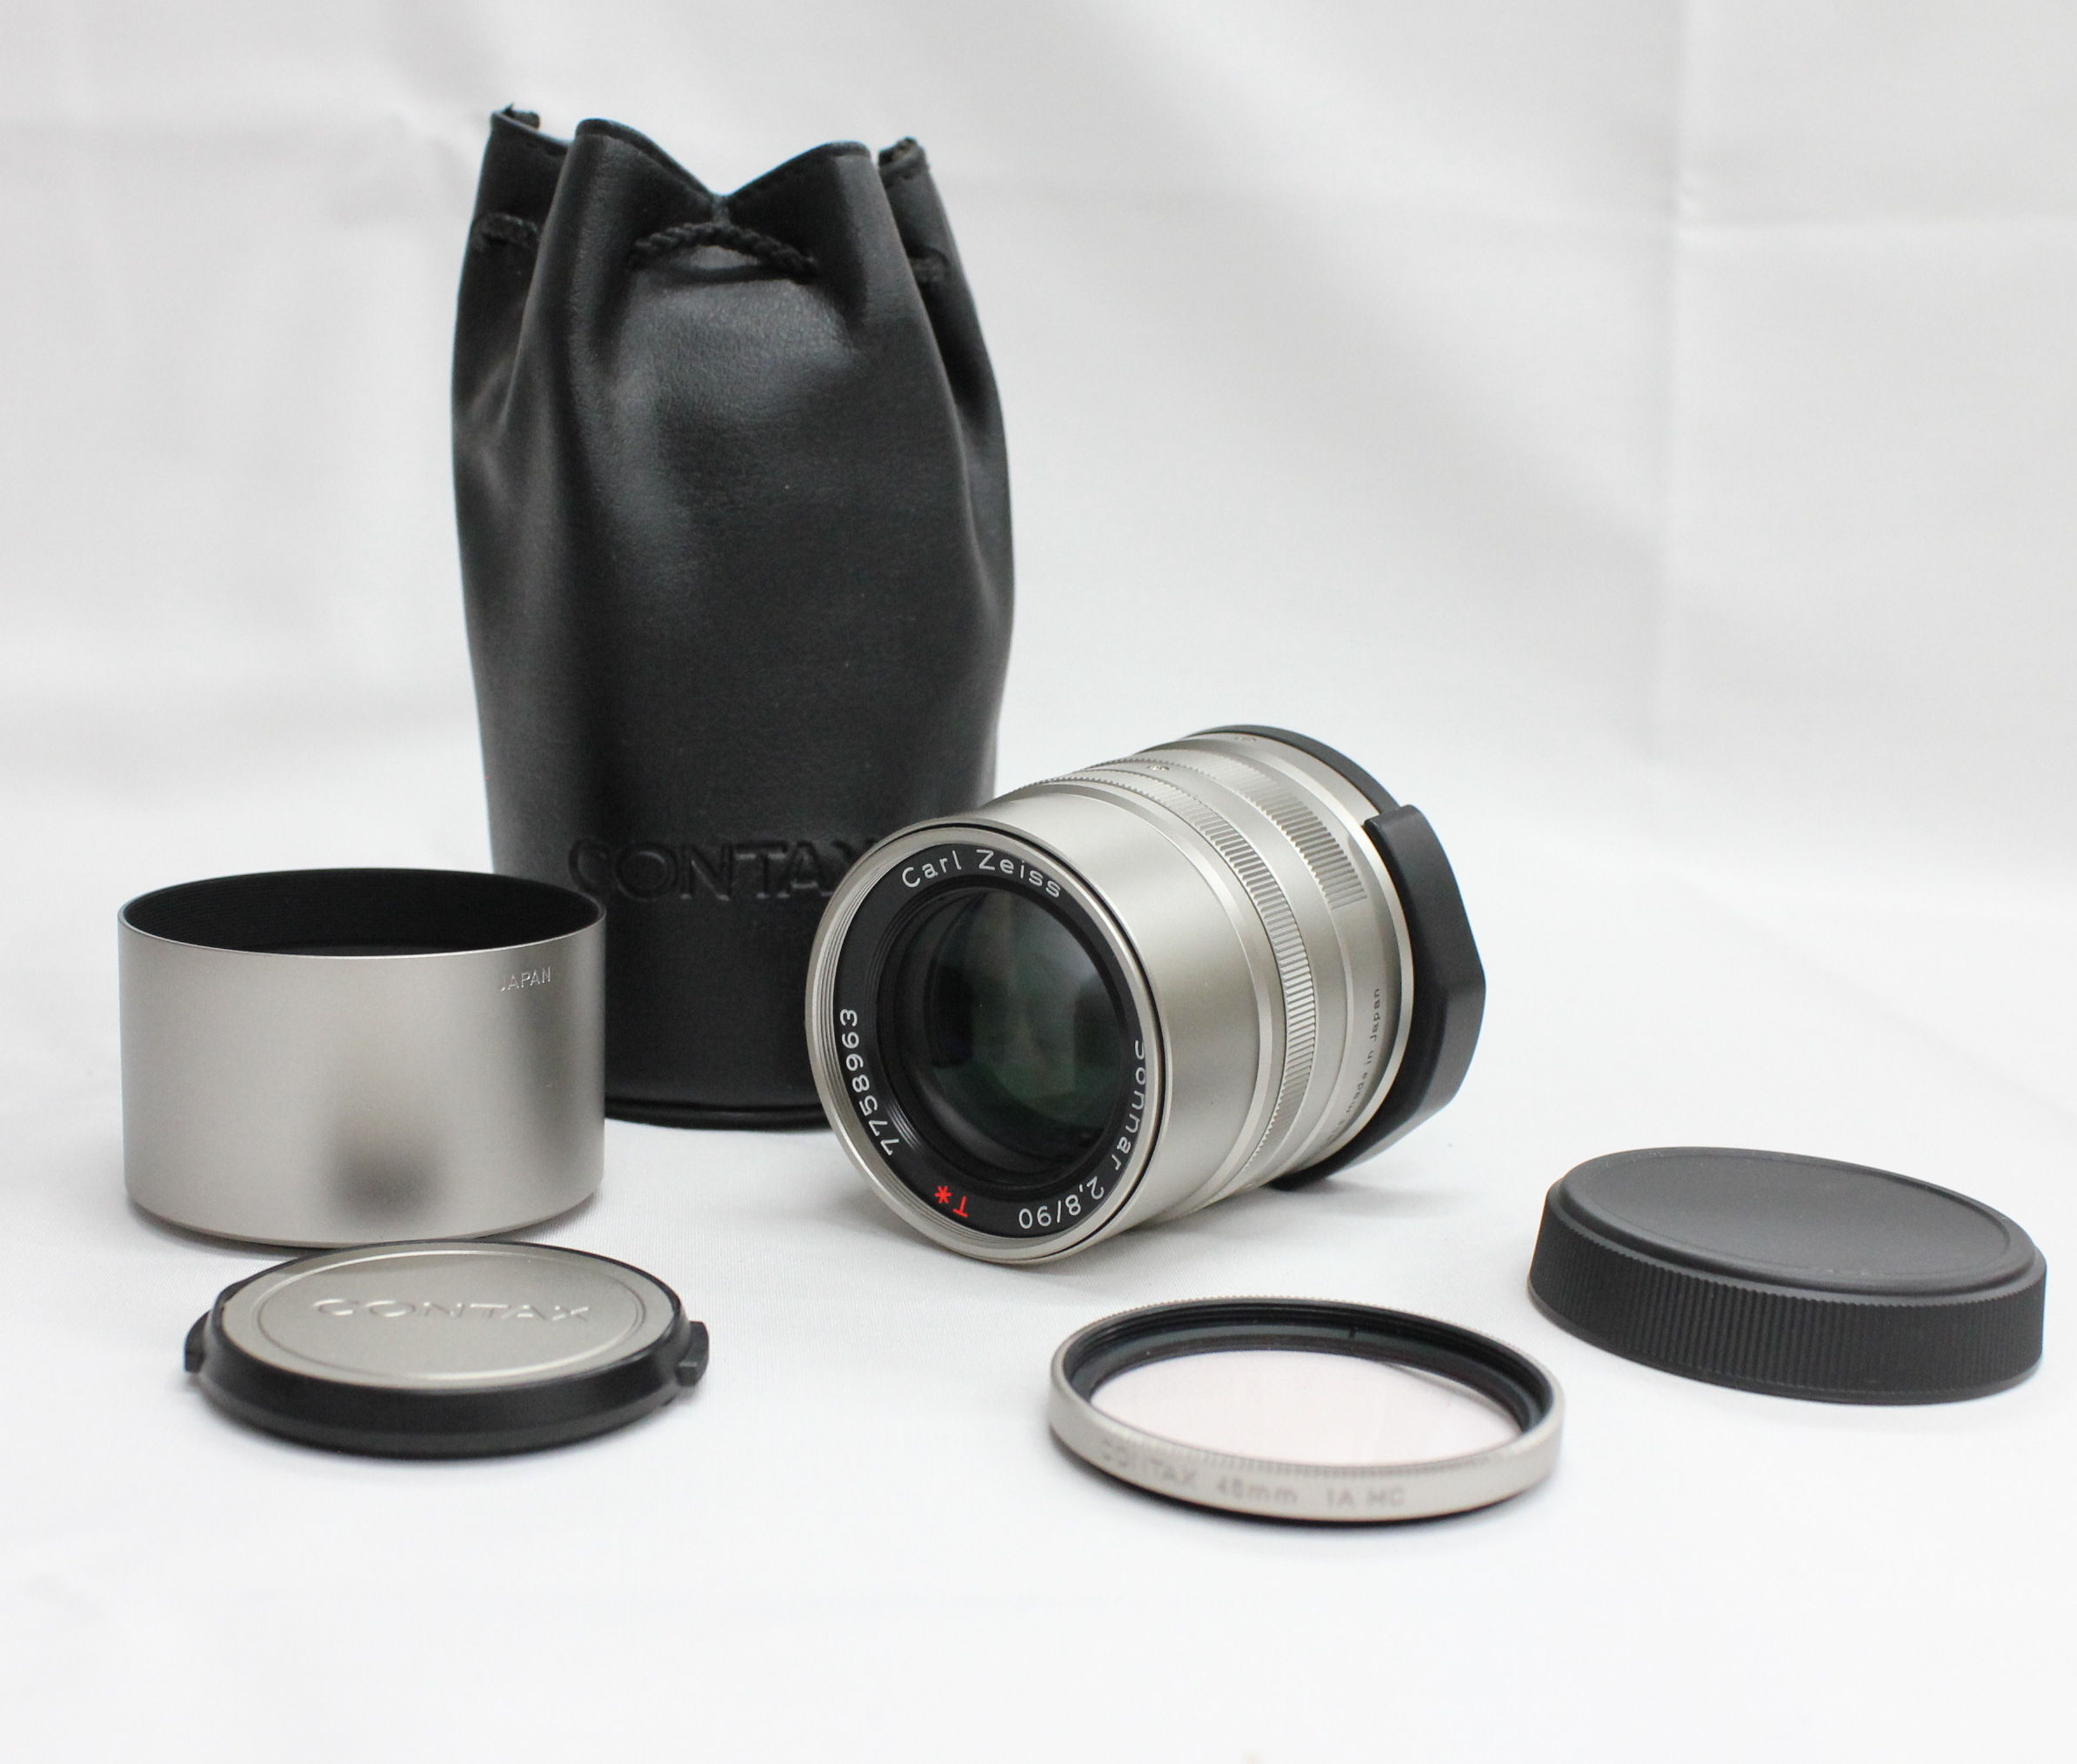 [Mint] Contax Carl Zeiss Sonnar 90mm F/2.8 T* AF Lens with Hood/Filter/Case for G1 G2 from JAPAN